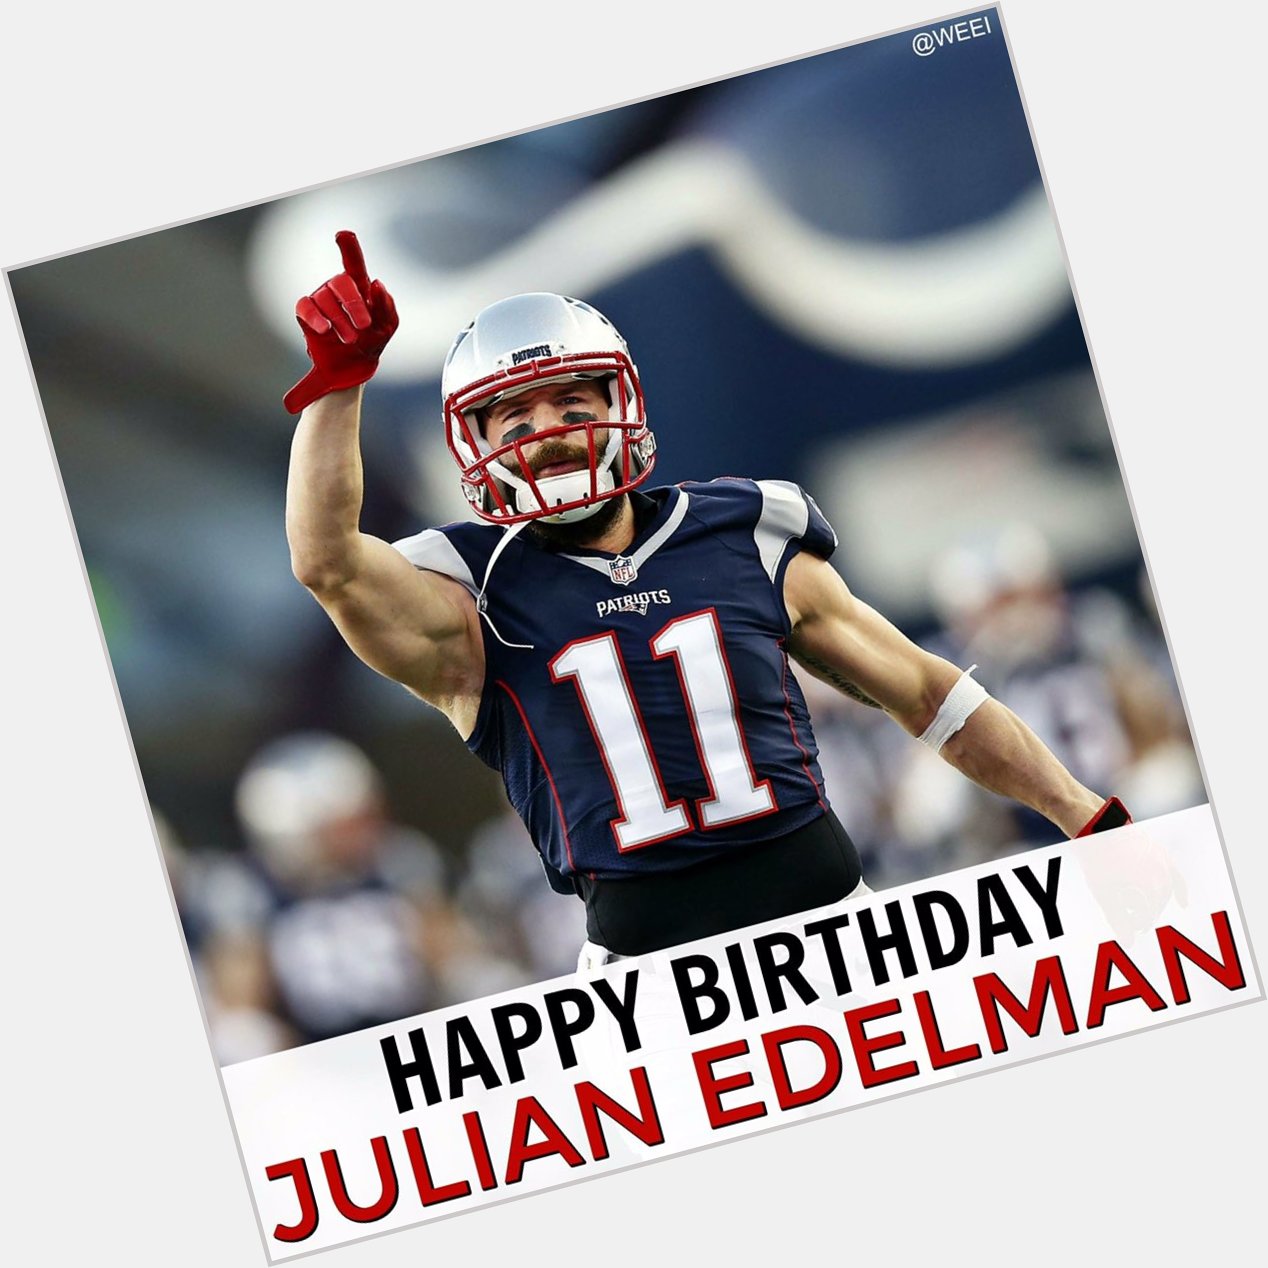 Good morning everyone! Happy birthday to one of my favorite player Julian Edelman               